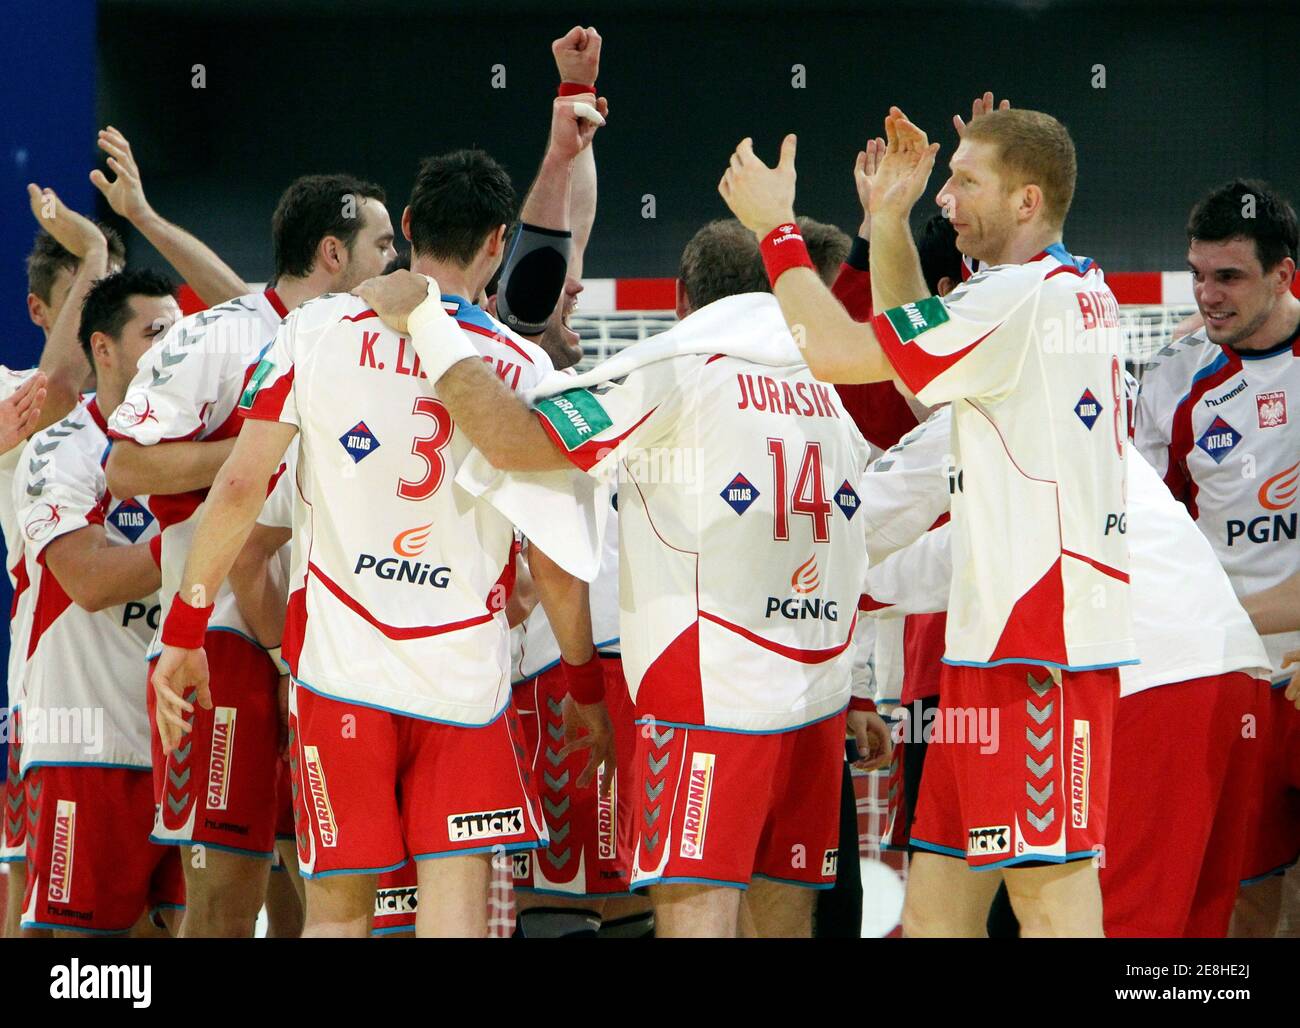 Poland's players celebrate their victory after their Men's European Handball Championship group C match against Sweden in Innsbruck, January 20, 2010.  REUTERS/Oleg Popov (AUSTRIA - Tags: SPORT HANDBALL) Stock Photo